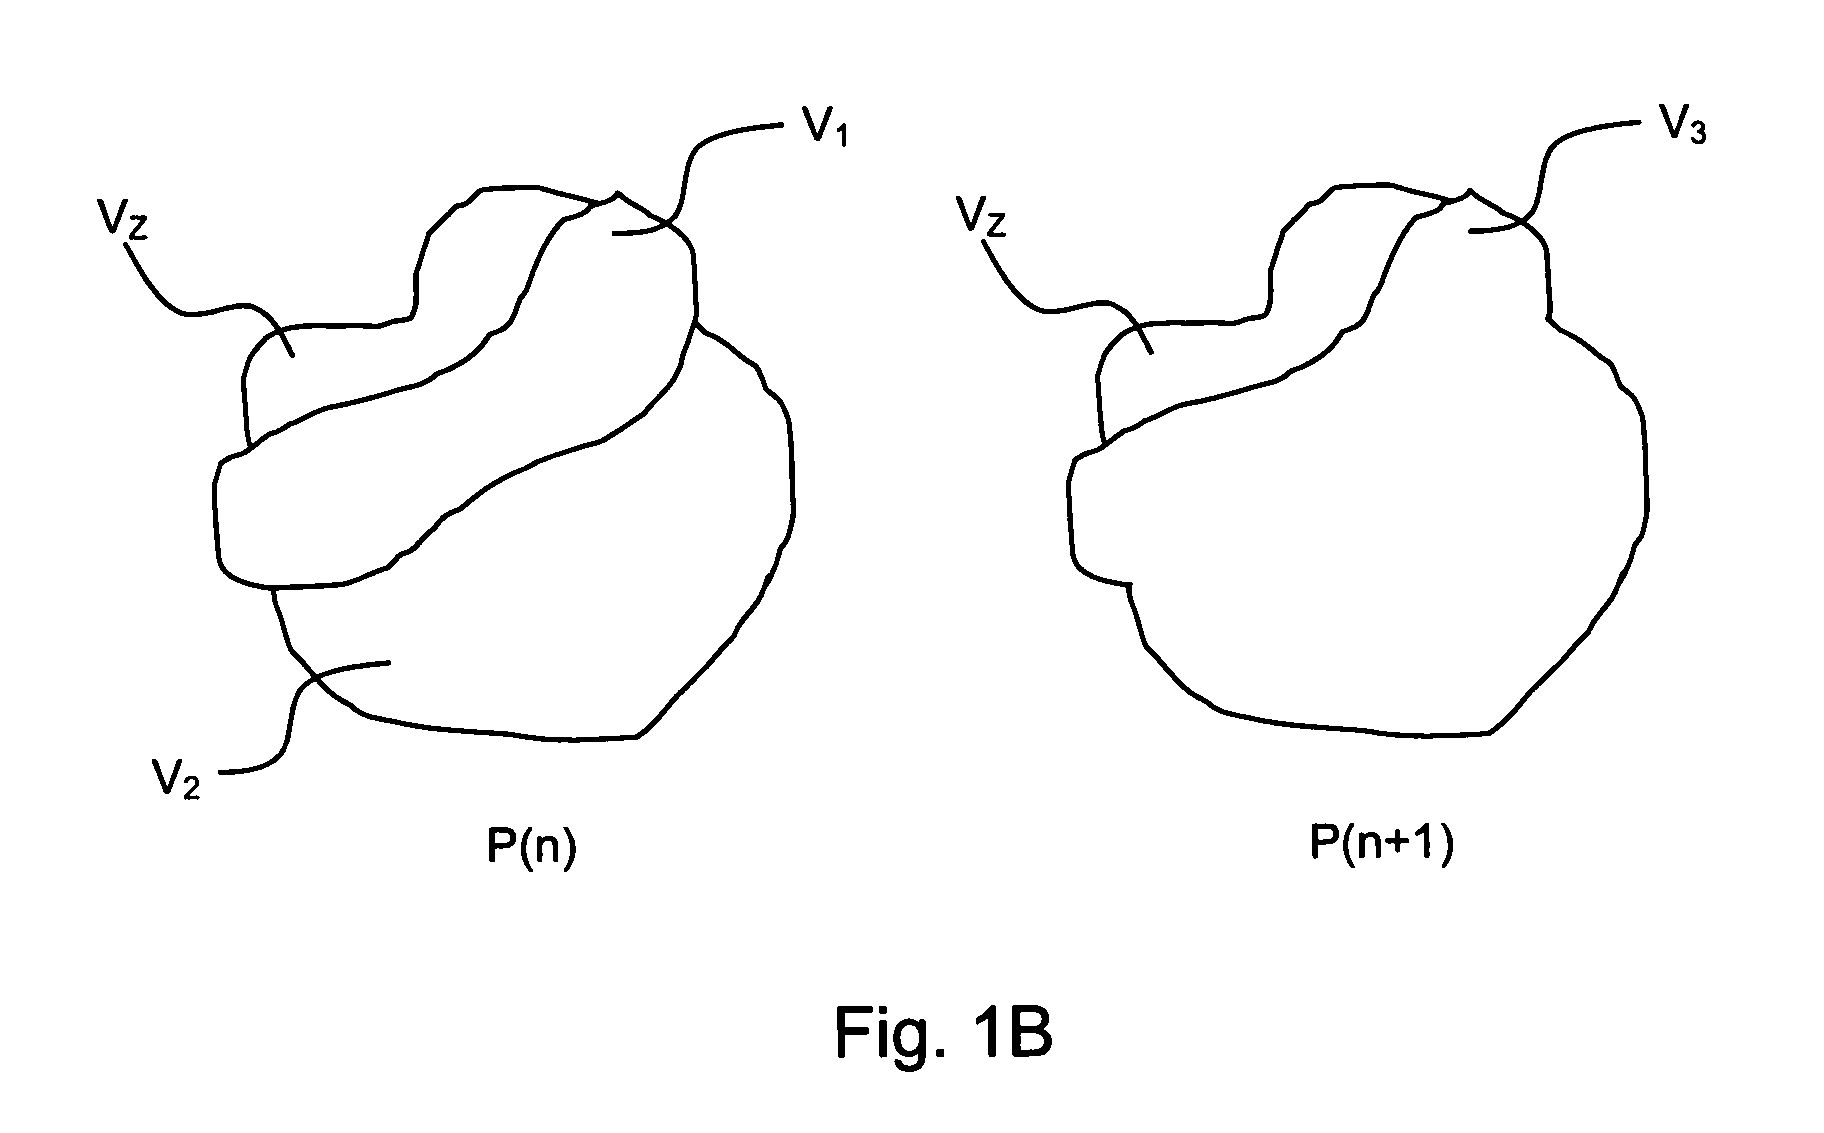 Classification of image blocks by region contrast significance and uses therefor in selective image enhancement in video and image coding